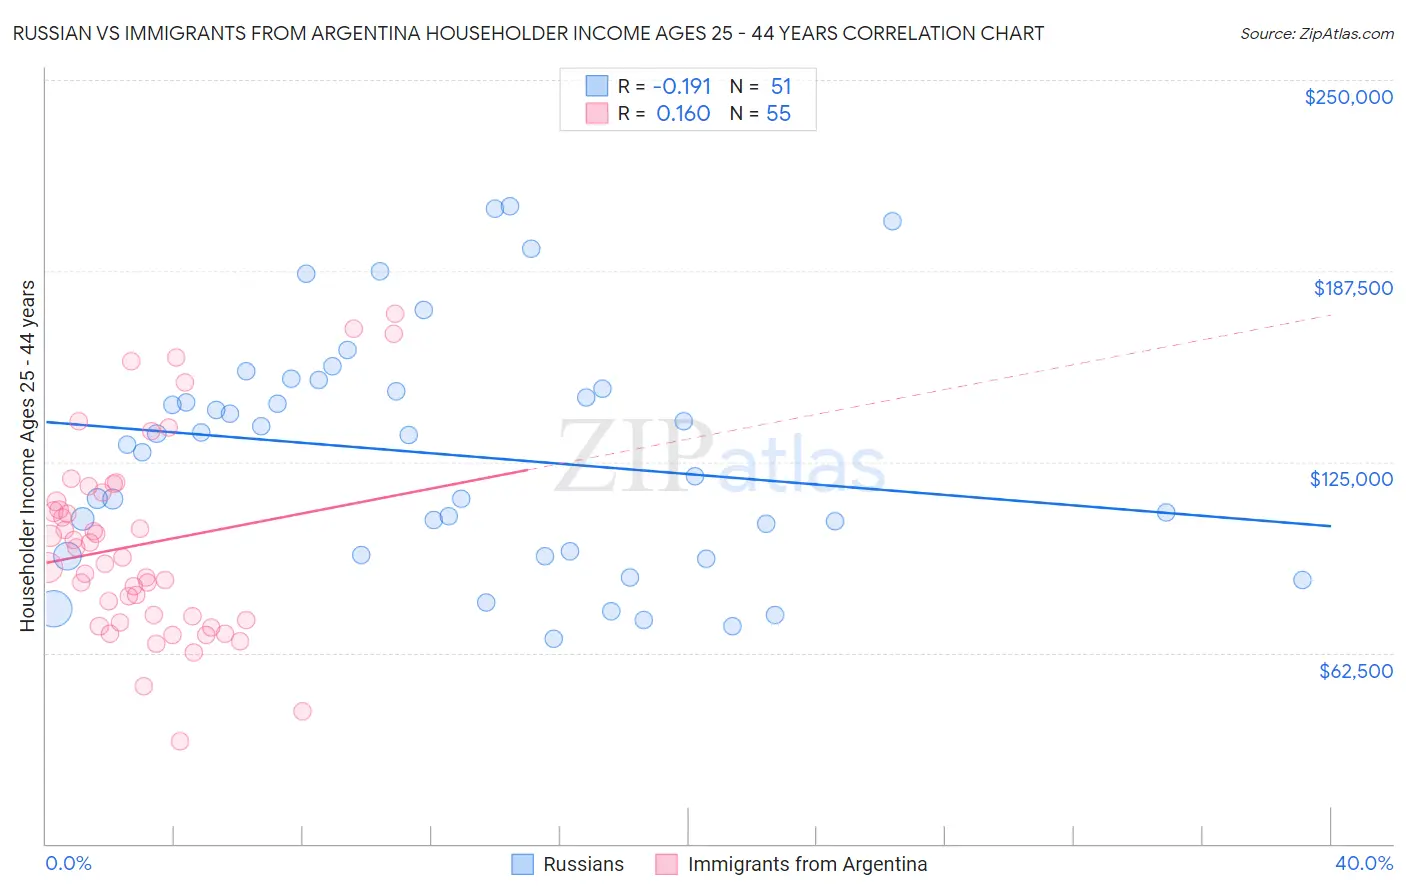 Russian vs Immigrants from Argentina Householder Income Ages 25 - 44 years